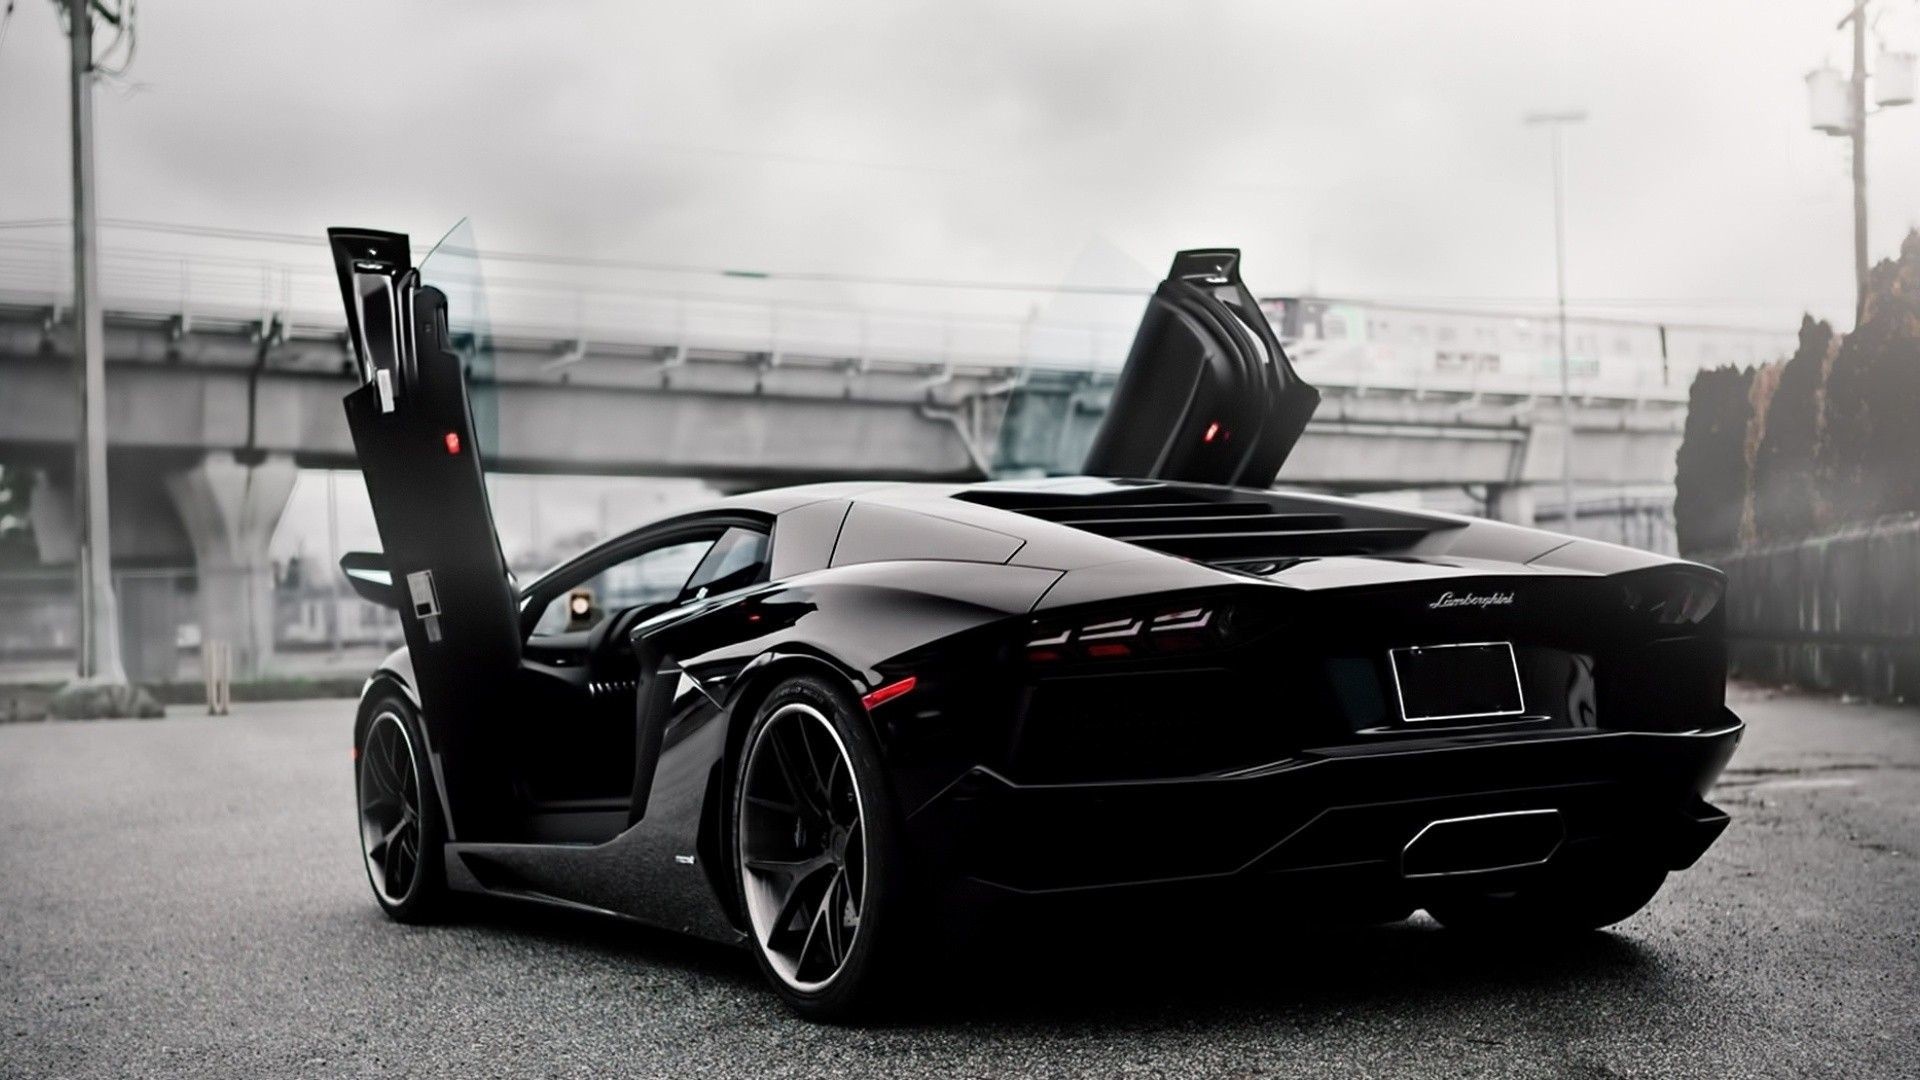 Lamborghini Aventador, Captivating wallpapers, Gallery of beauty, 76 stunning pictures, 1920x1080 Full HD Desktop